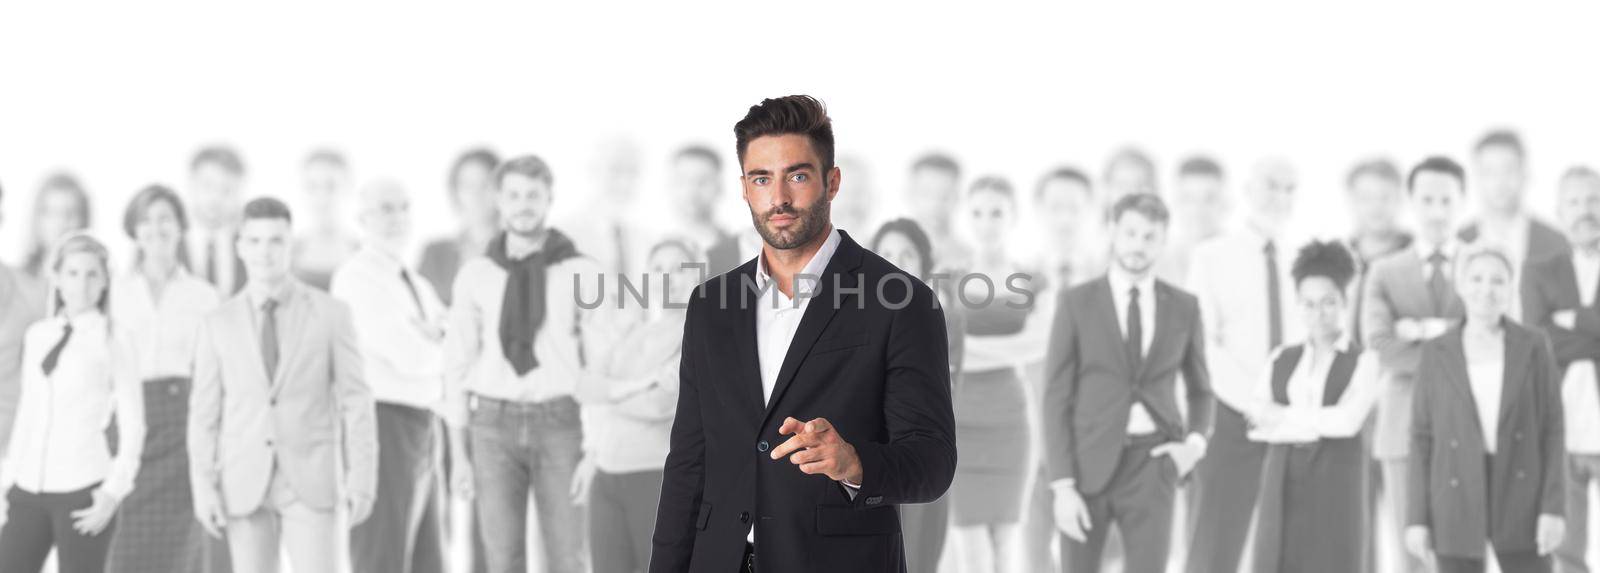 Businessman pointing at you in front of crowd of business people cooperation job search staff management concept